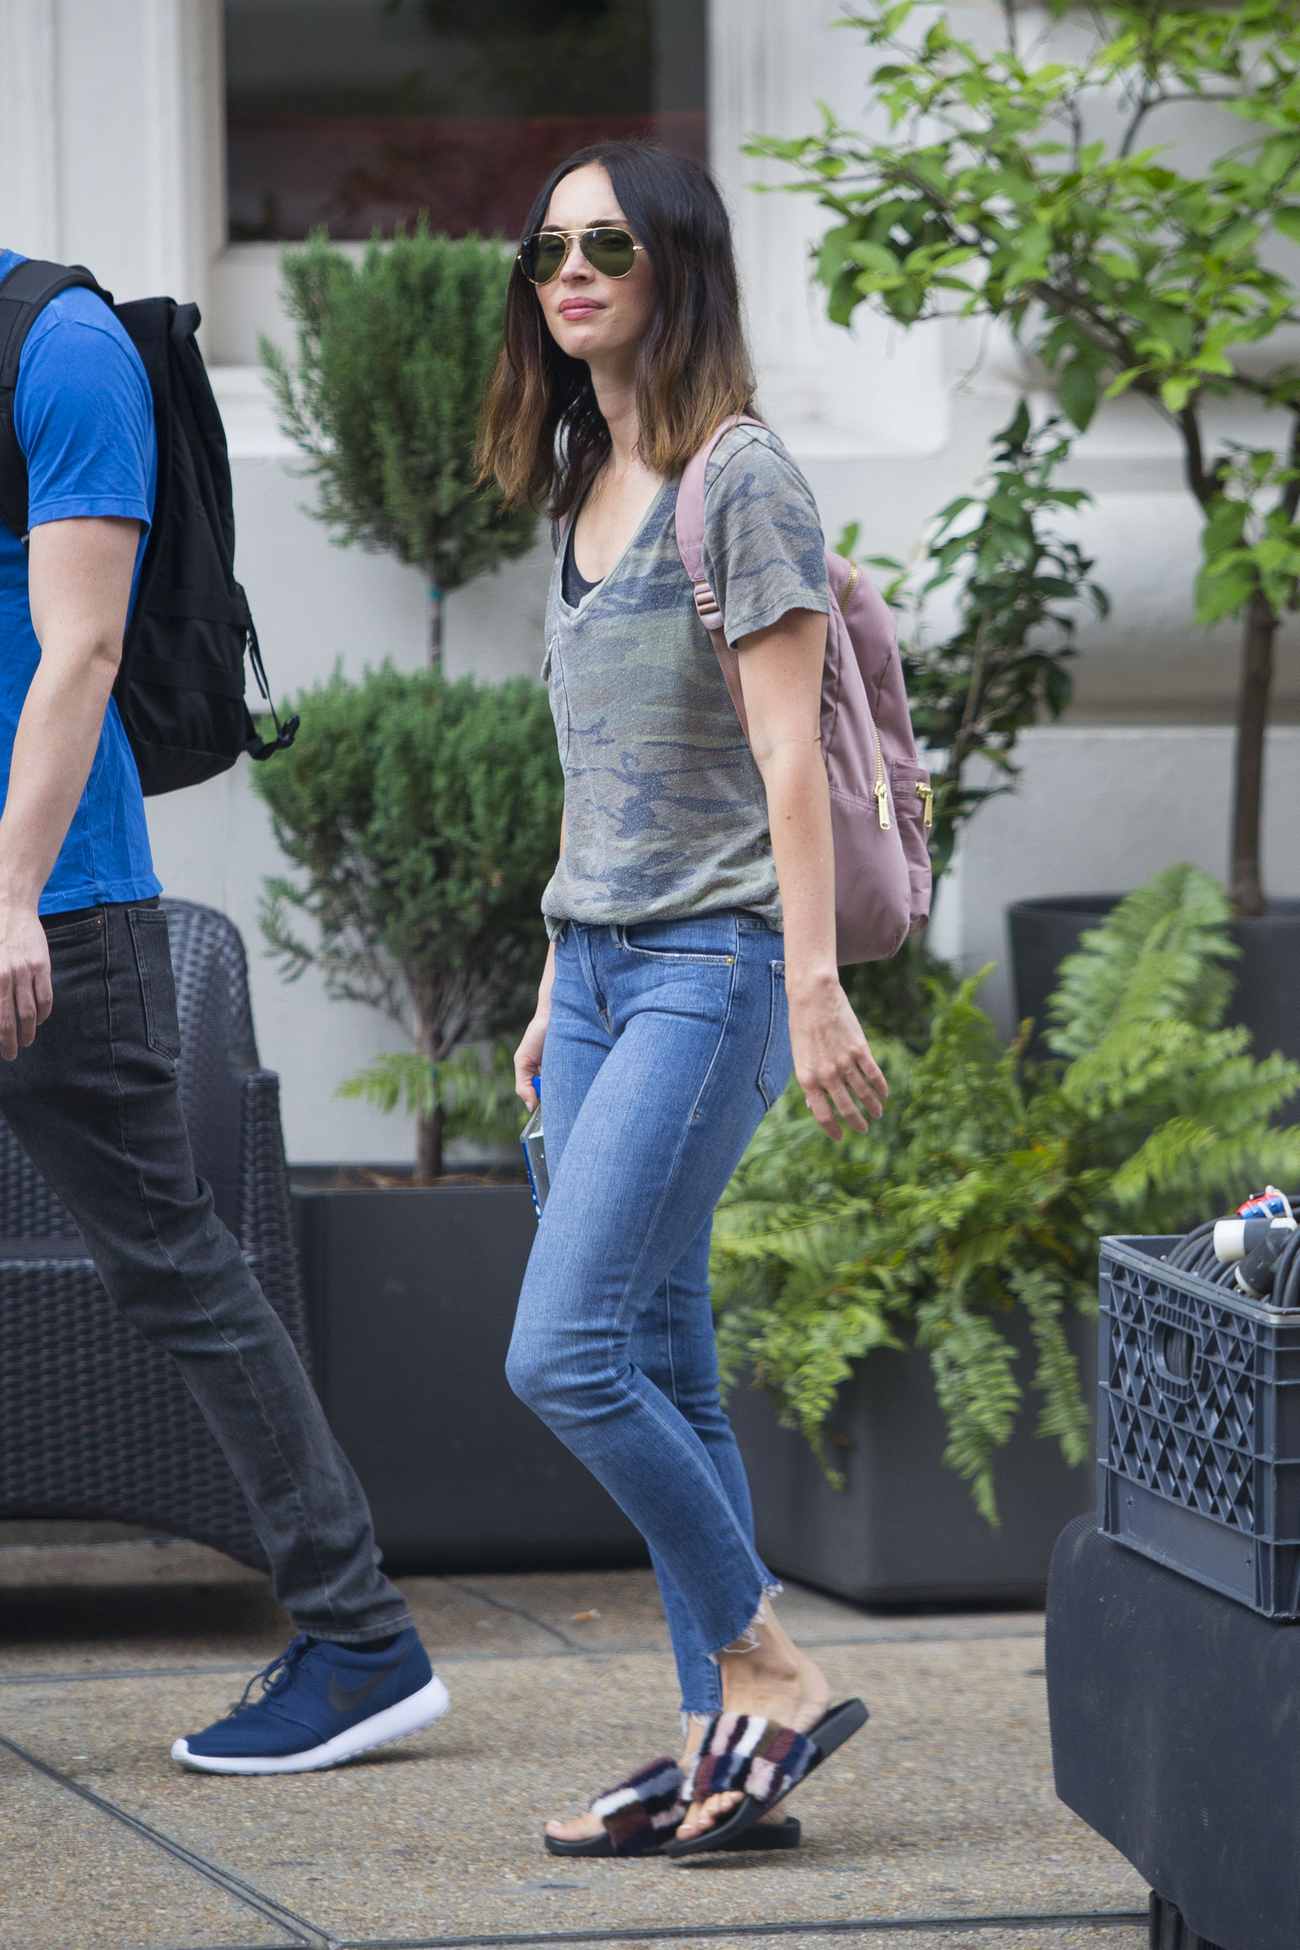 Megan_Fox_was_seen_going_for_a_stroll_and_doing_some_flower_shopping_with_a_male_friend_28129.jpg